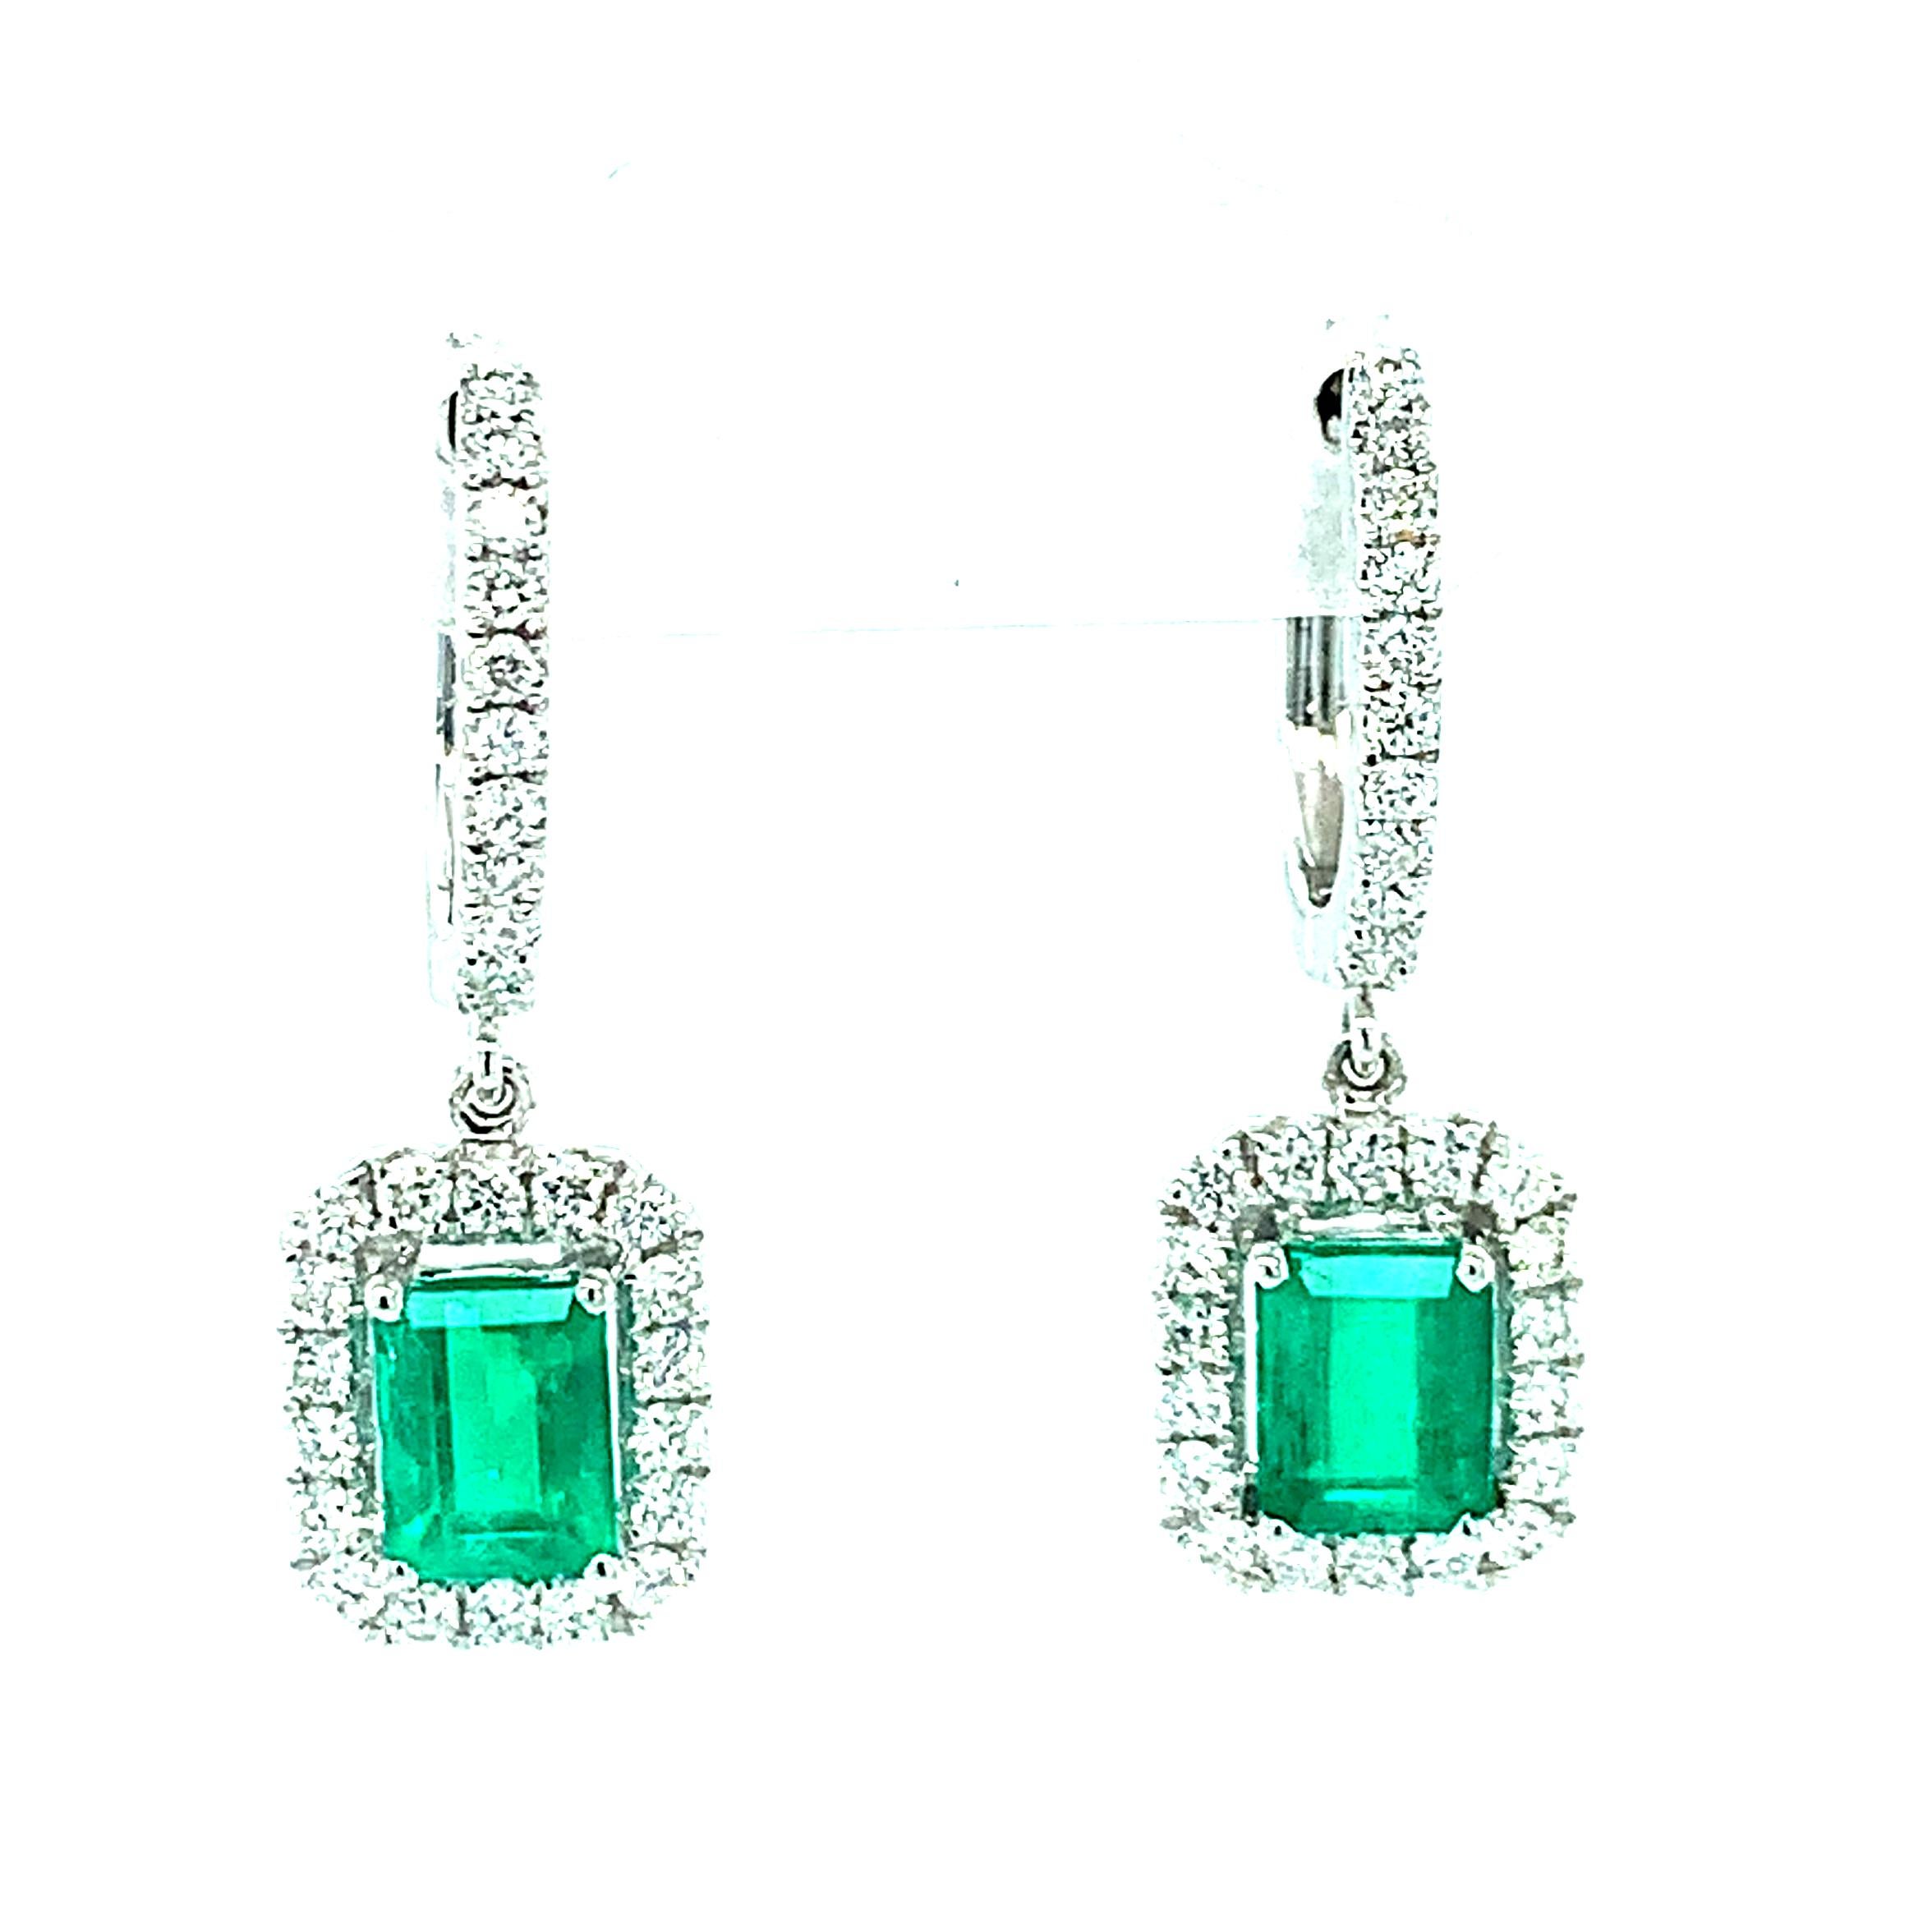 These gorgeous emerald and diamond earrings are a luxurious statement of classic elegance and style! Two brilliant, rich green emerald-cut emeralds are set in bright 18k white gold, surrounded by a sparkling halo of round brilliant white diamonds.